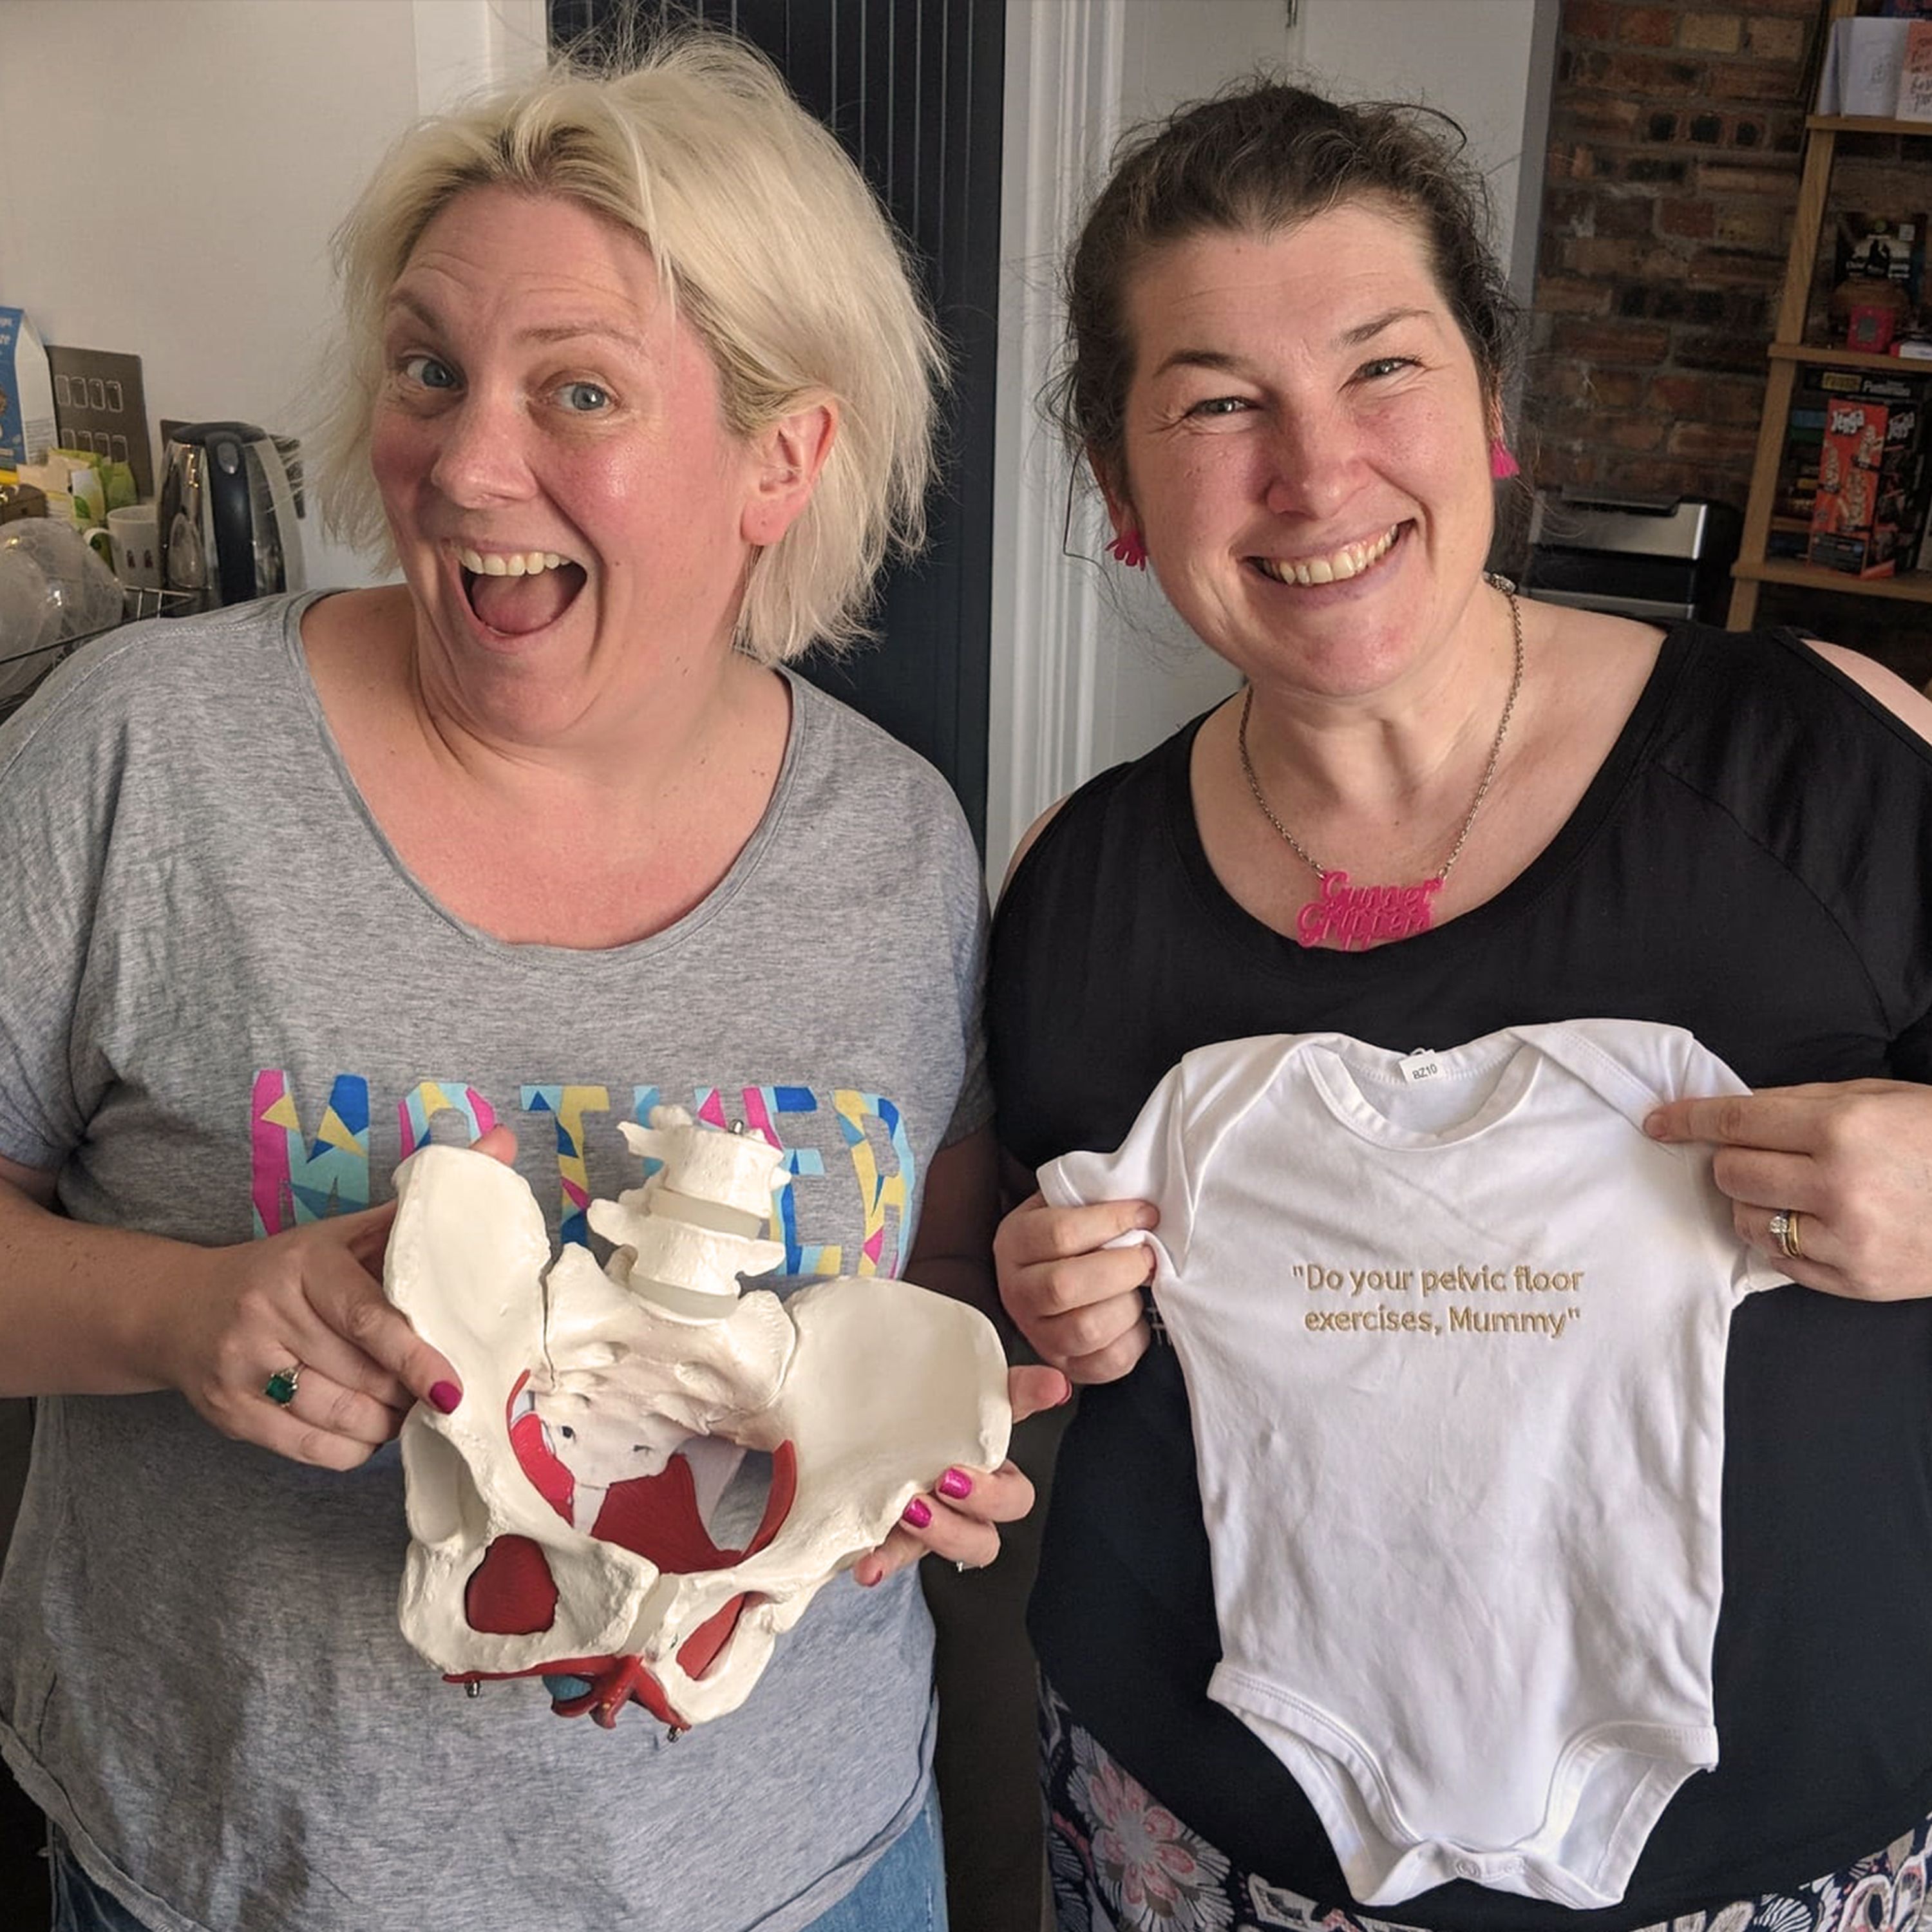 21. Fannies, Flaps and Pelvic Floors with Elaine Miller aka (Gusset Grippers)